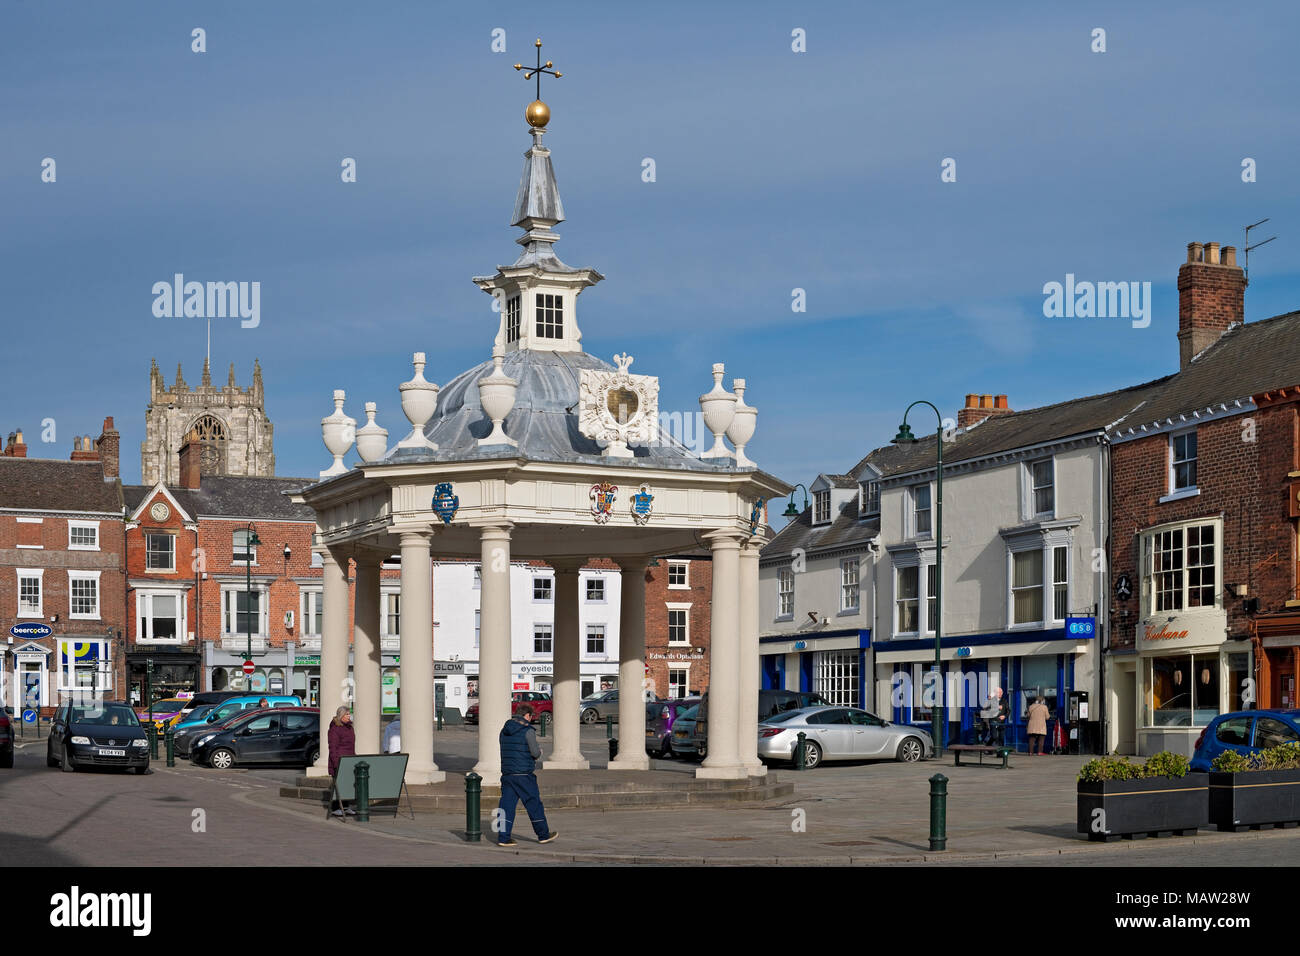 Market Cross in spring Saturday Market Beverley town centre East Yorkshire England UK United Kingdom GB Great Britain Stock Photo